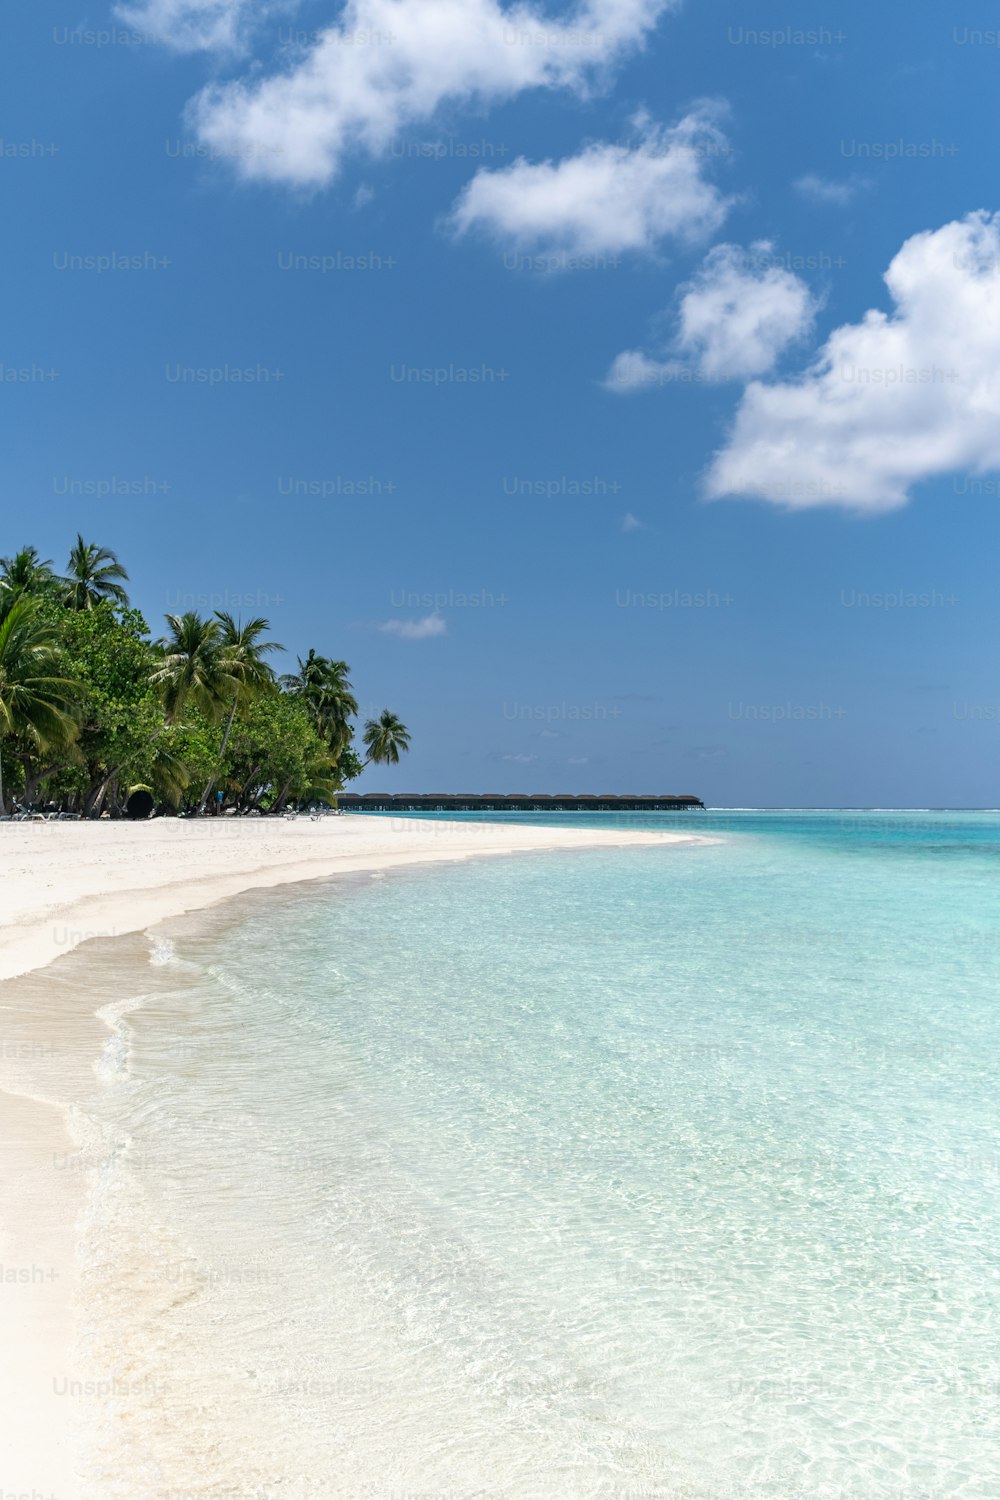 a white sandy beach with palm trees and clear water